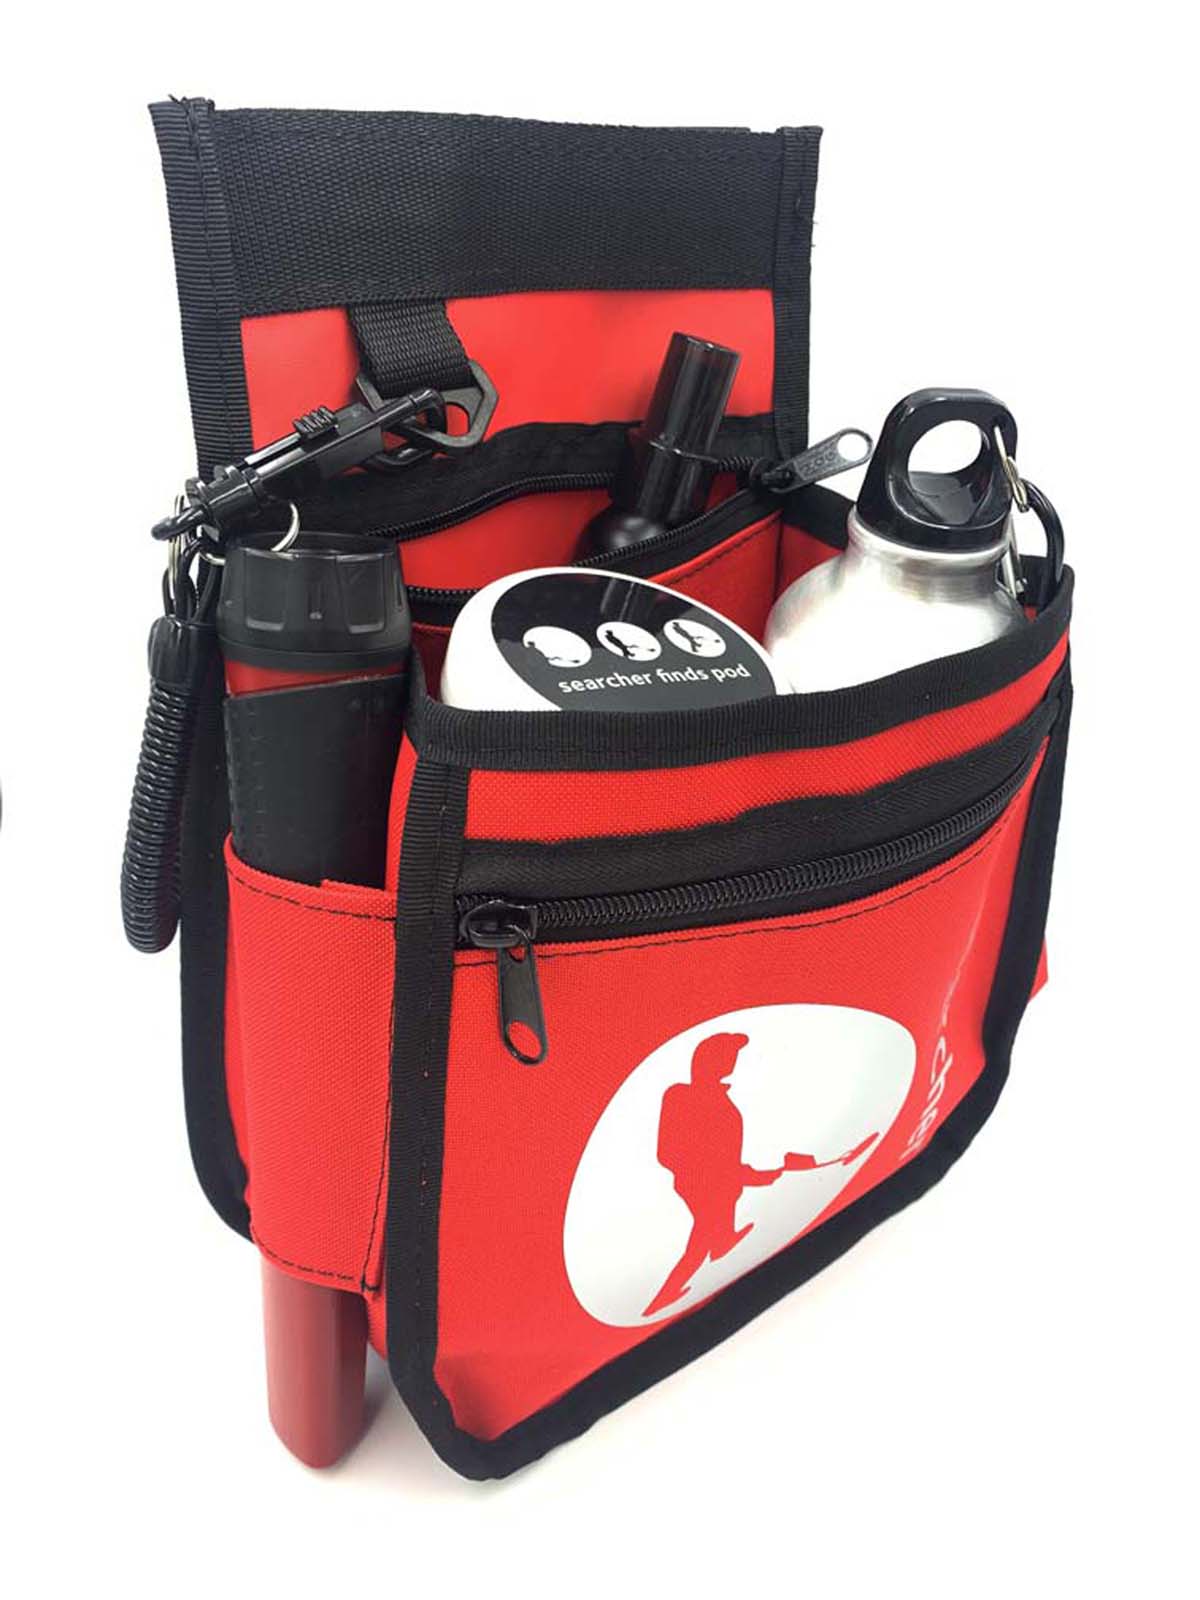 Searcher Finds + Tool PRO Bag - Red